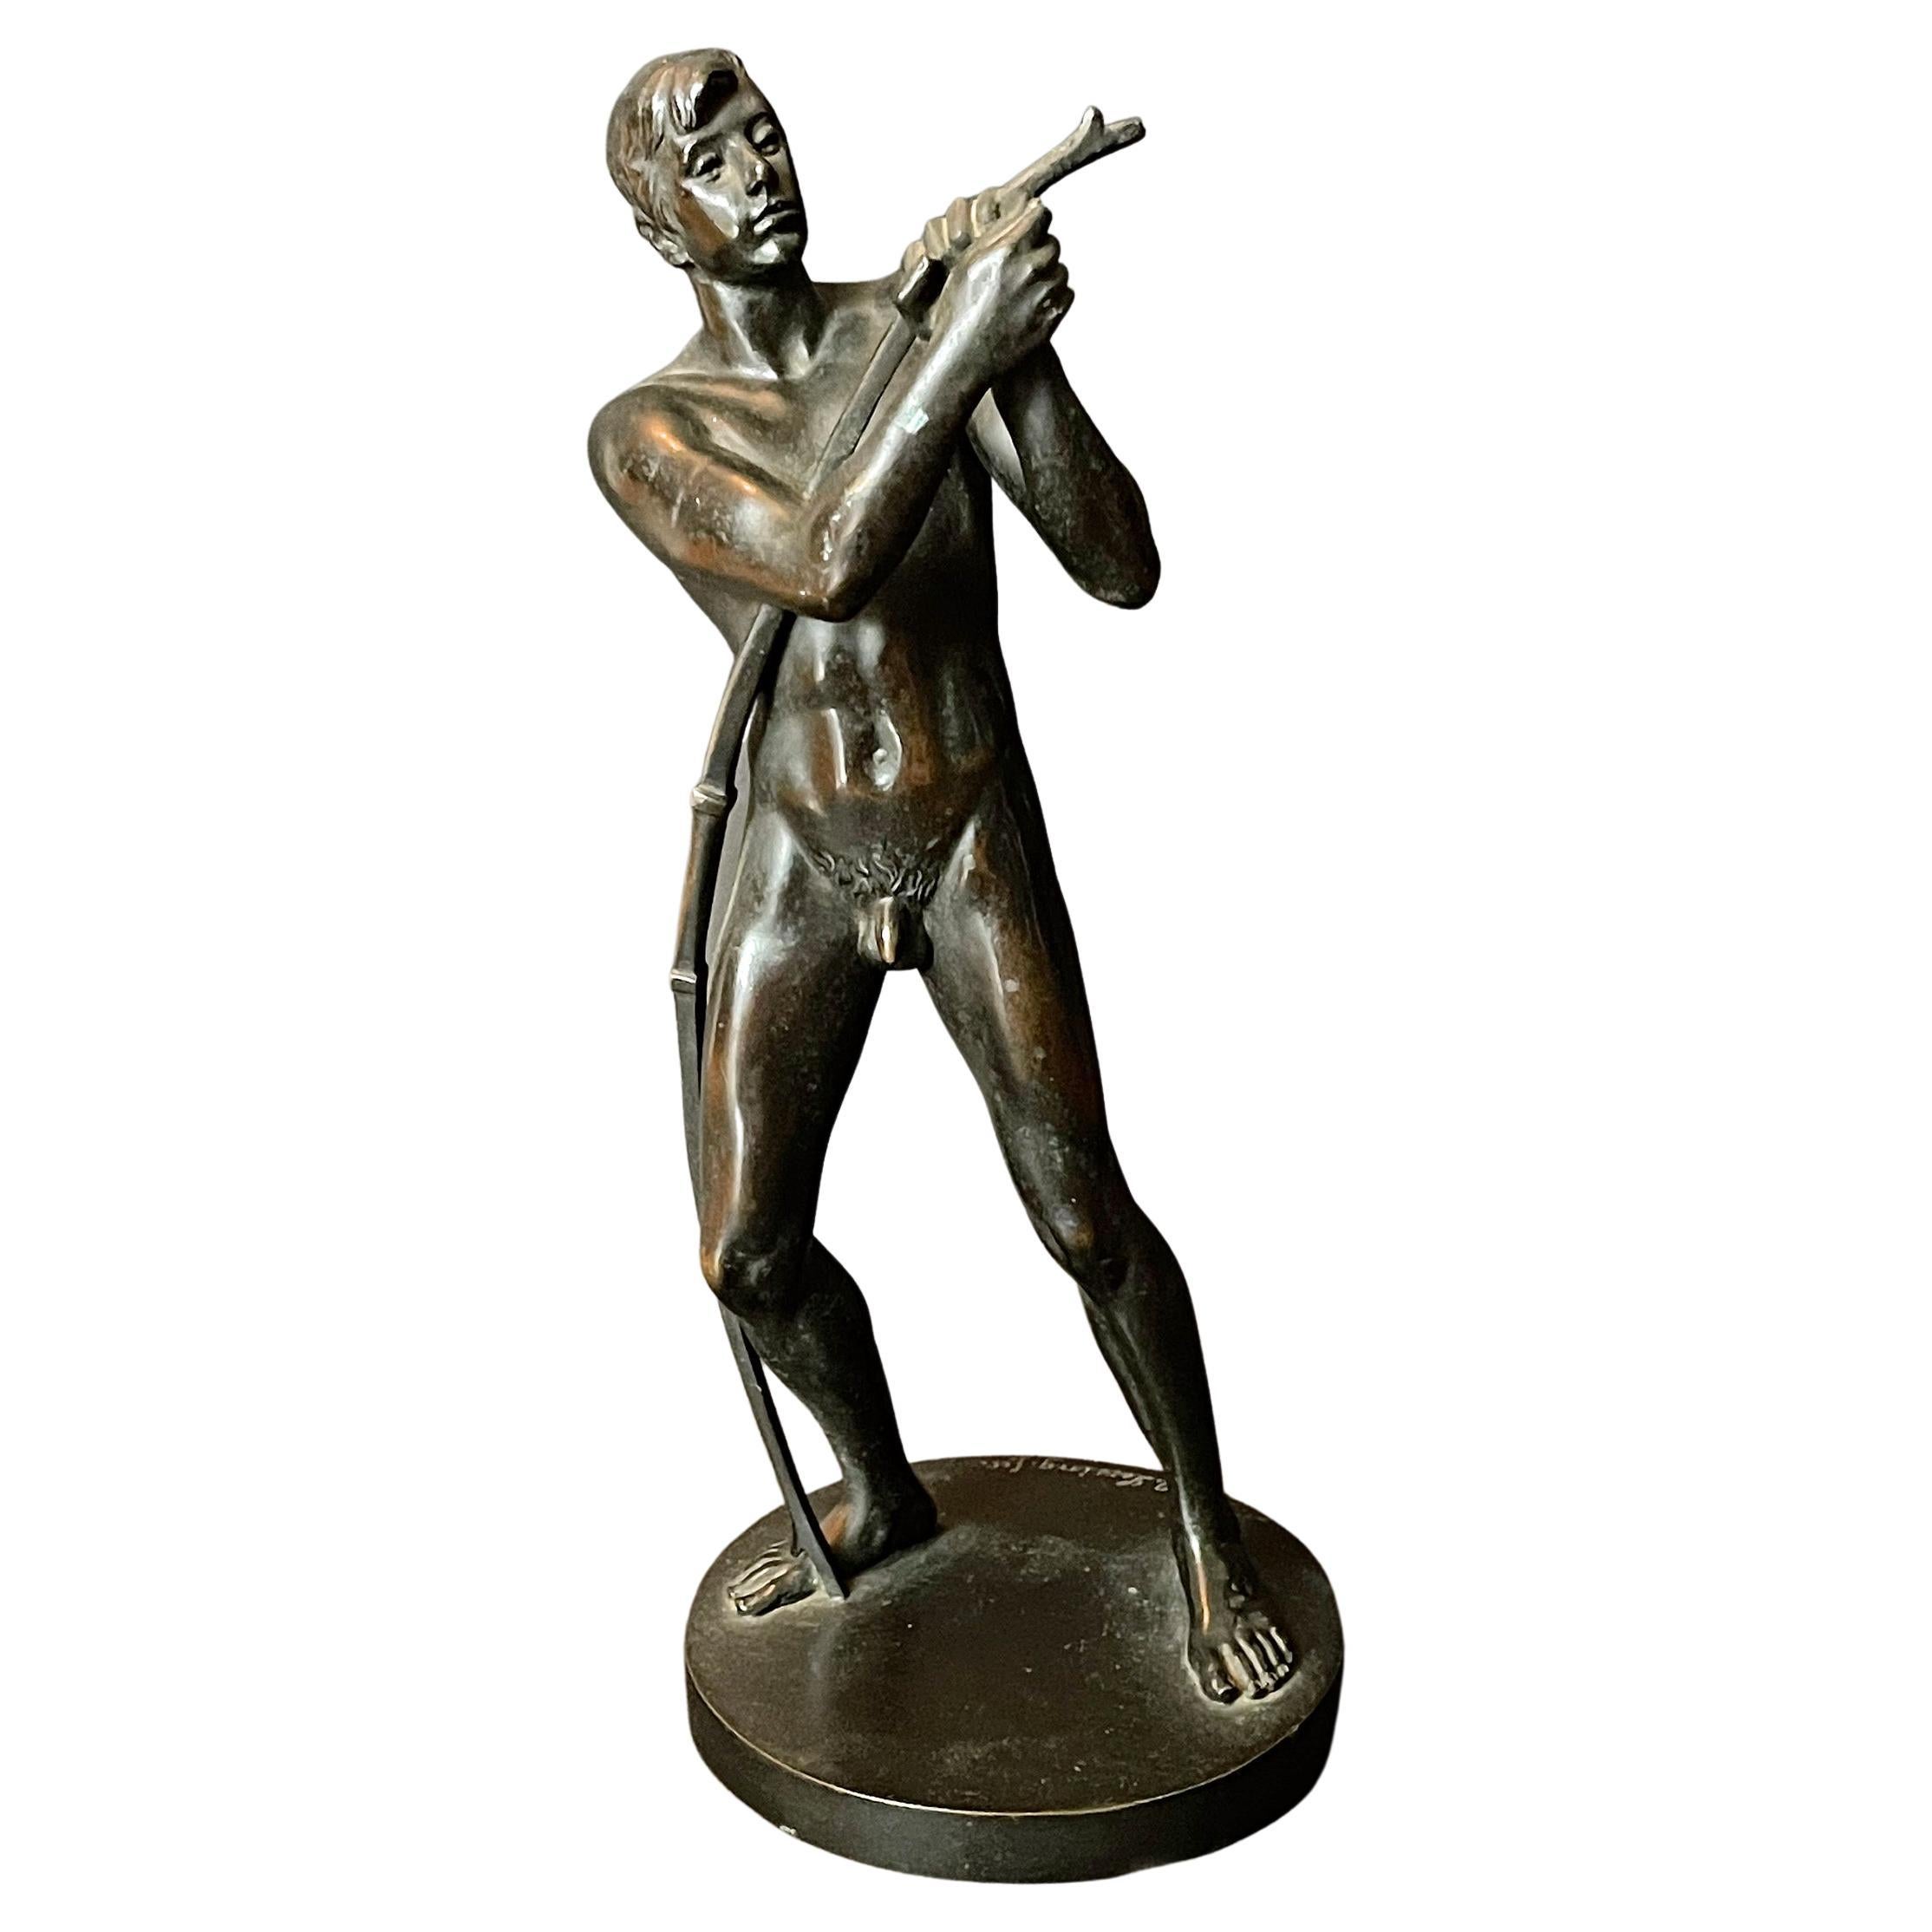 "Youth Stringing Bow," Rare, Beautifully Detailed Male Nude Bronze by Lessing